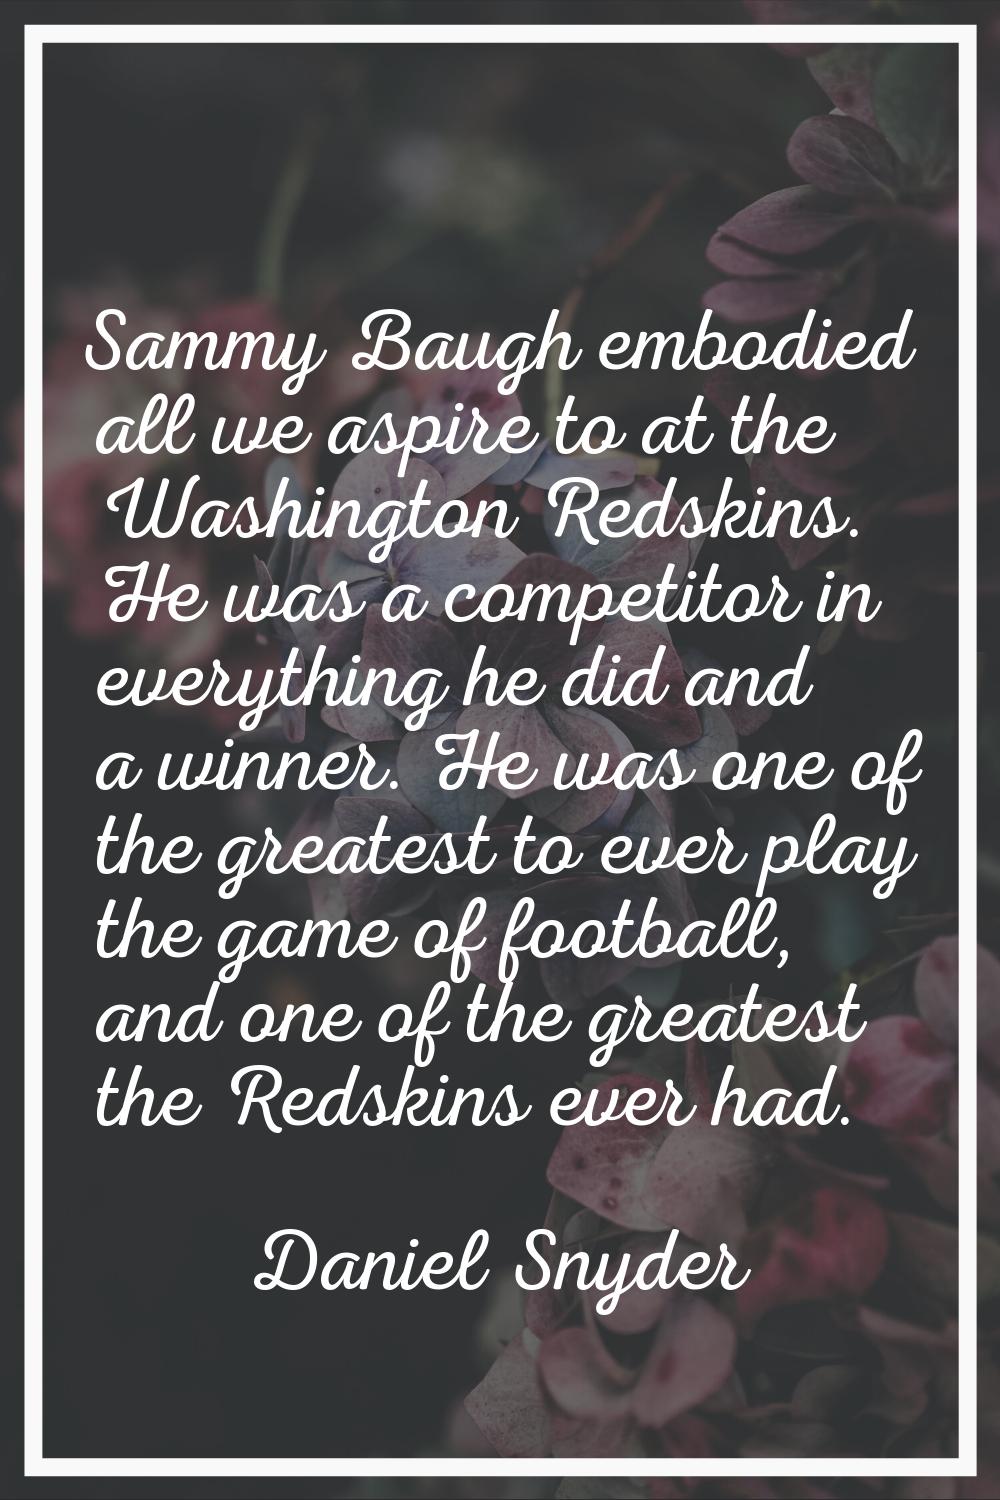 Sammy Baugh embodied all we aspire to at the Washington Redskins. He was a competitor in everything